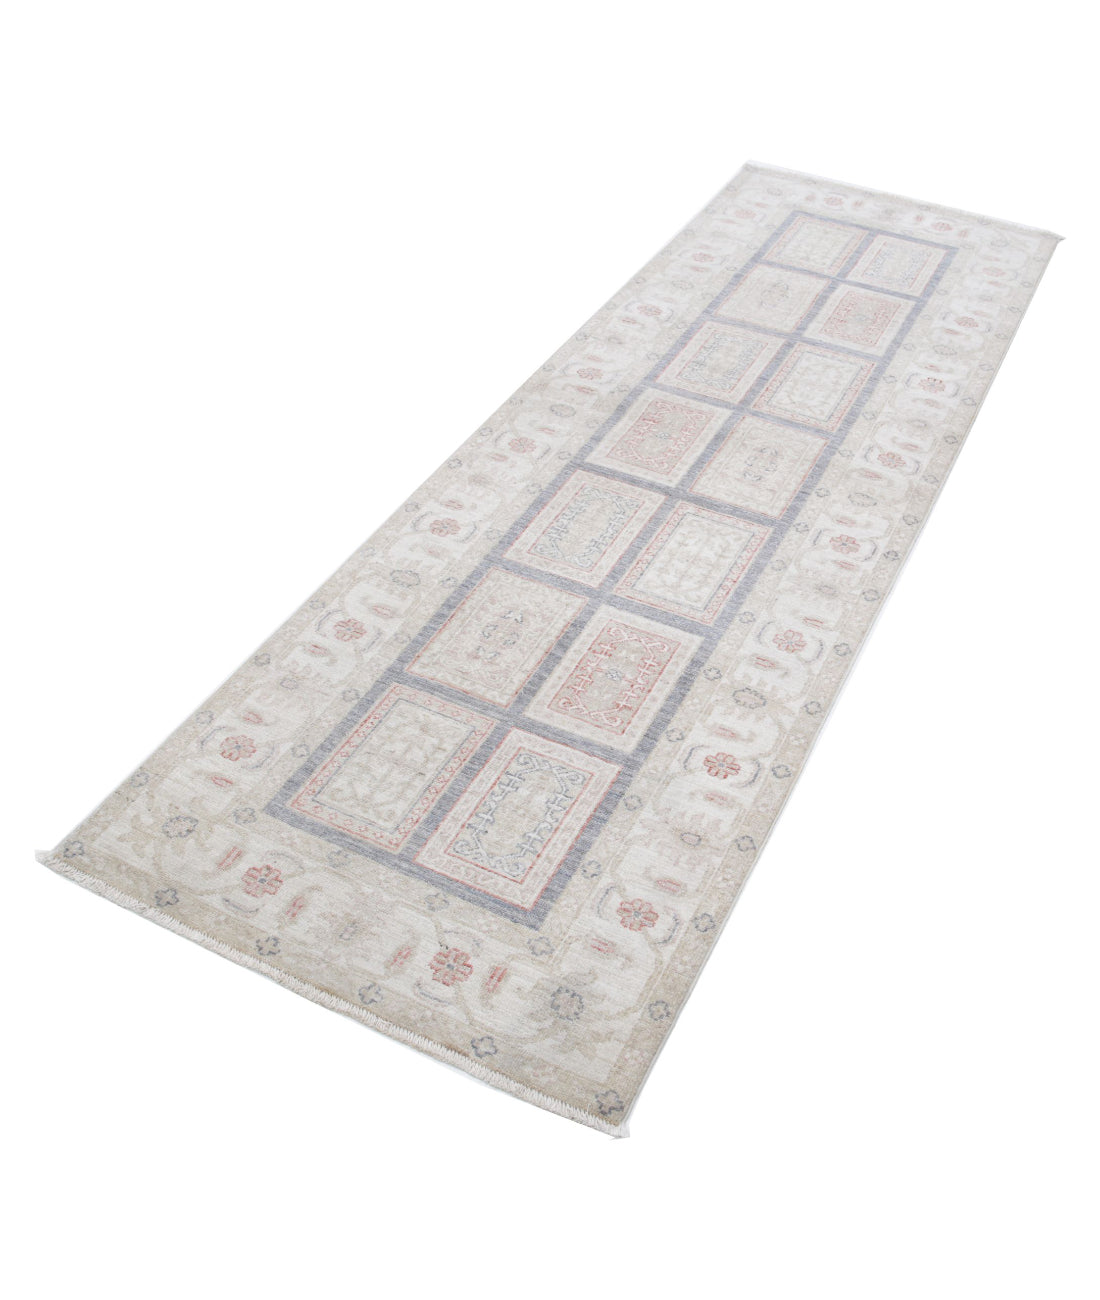 Hand Knotted Serenity Wool Rug - 2'7'' x 8'0'' 2'7'' x 8'0'' (78 X 240) / Grey / Ivory